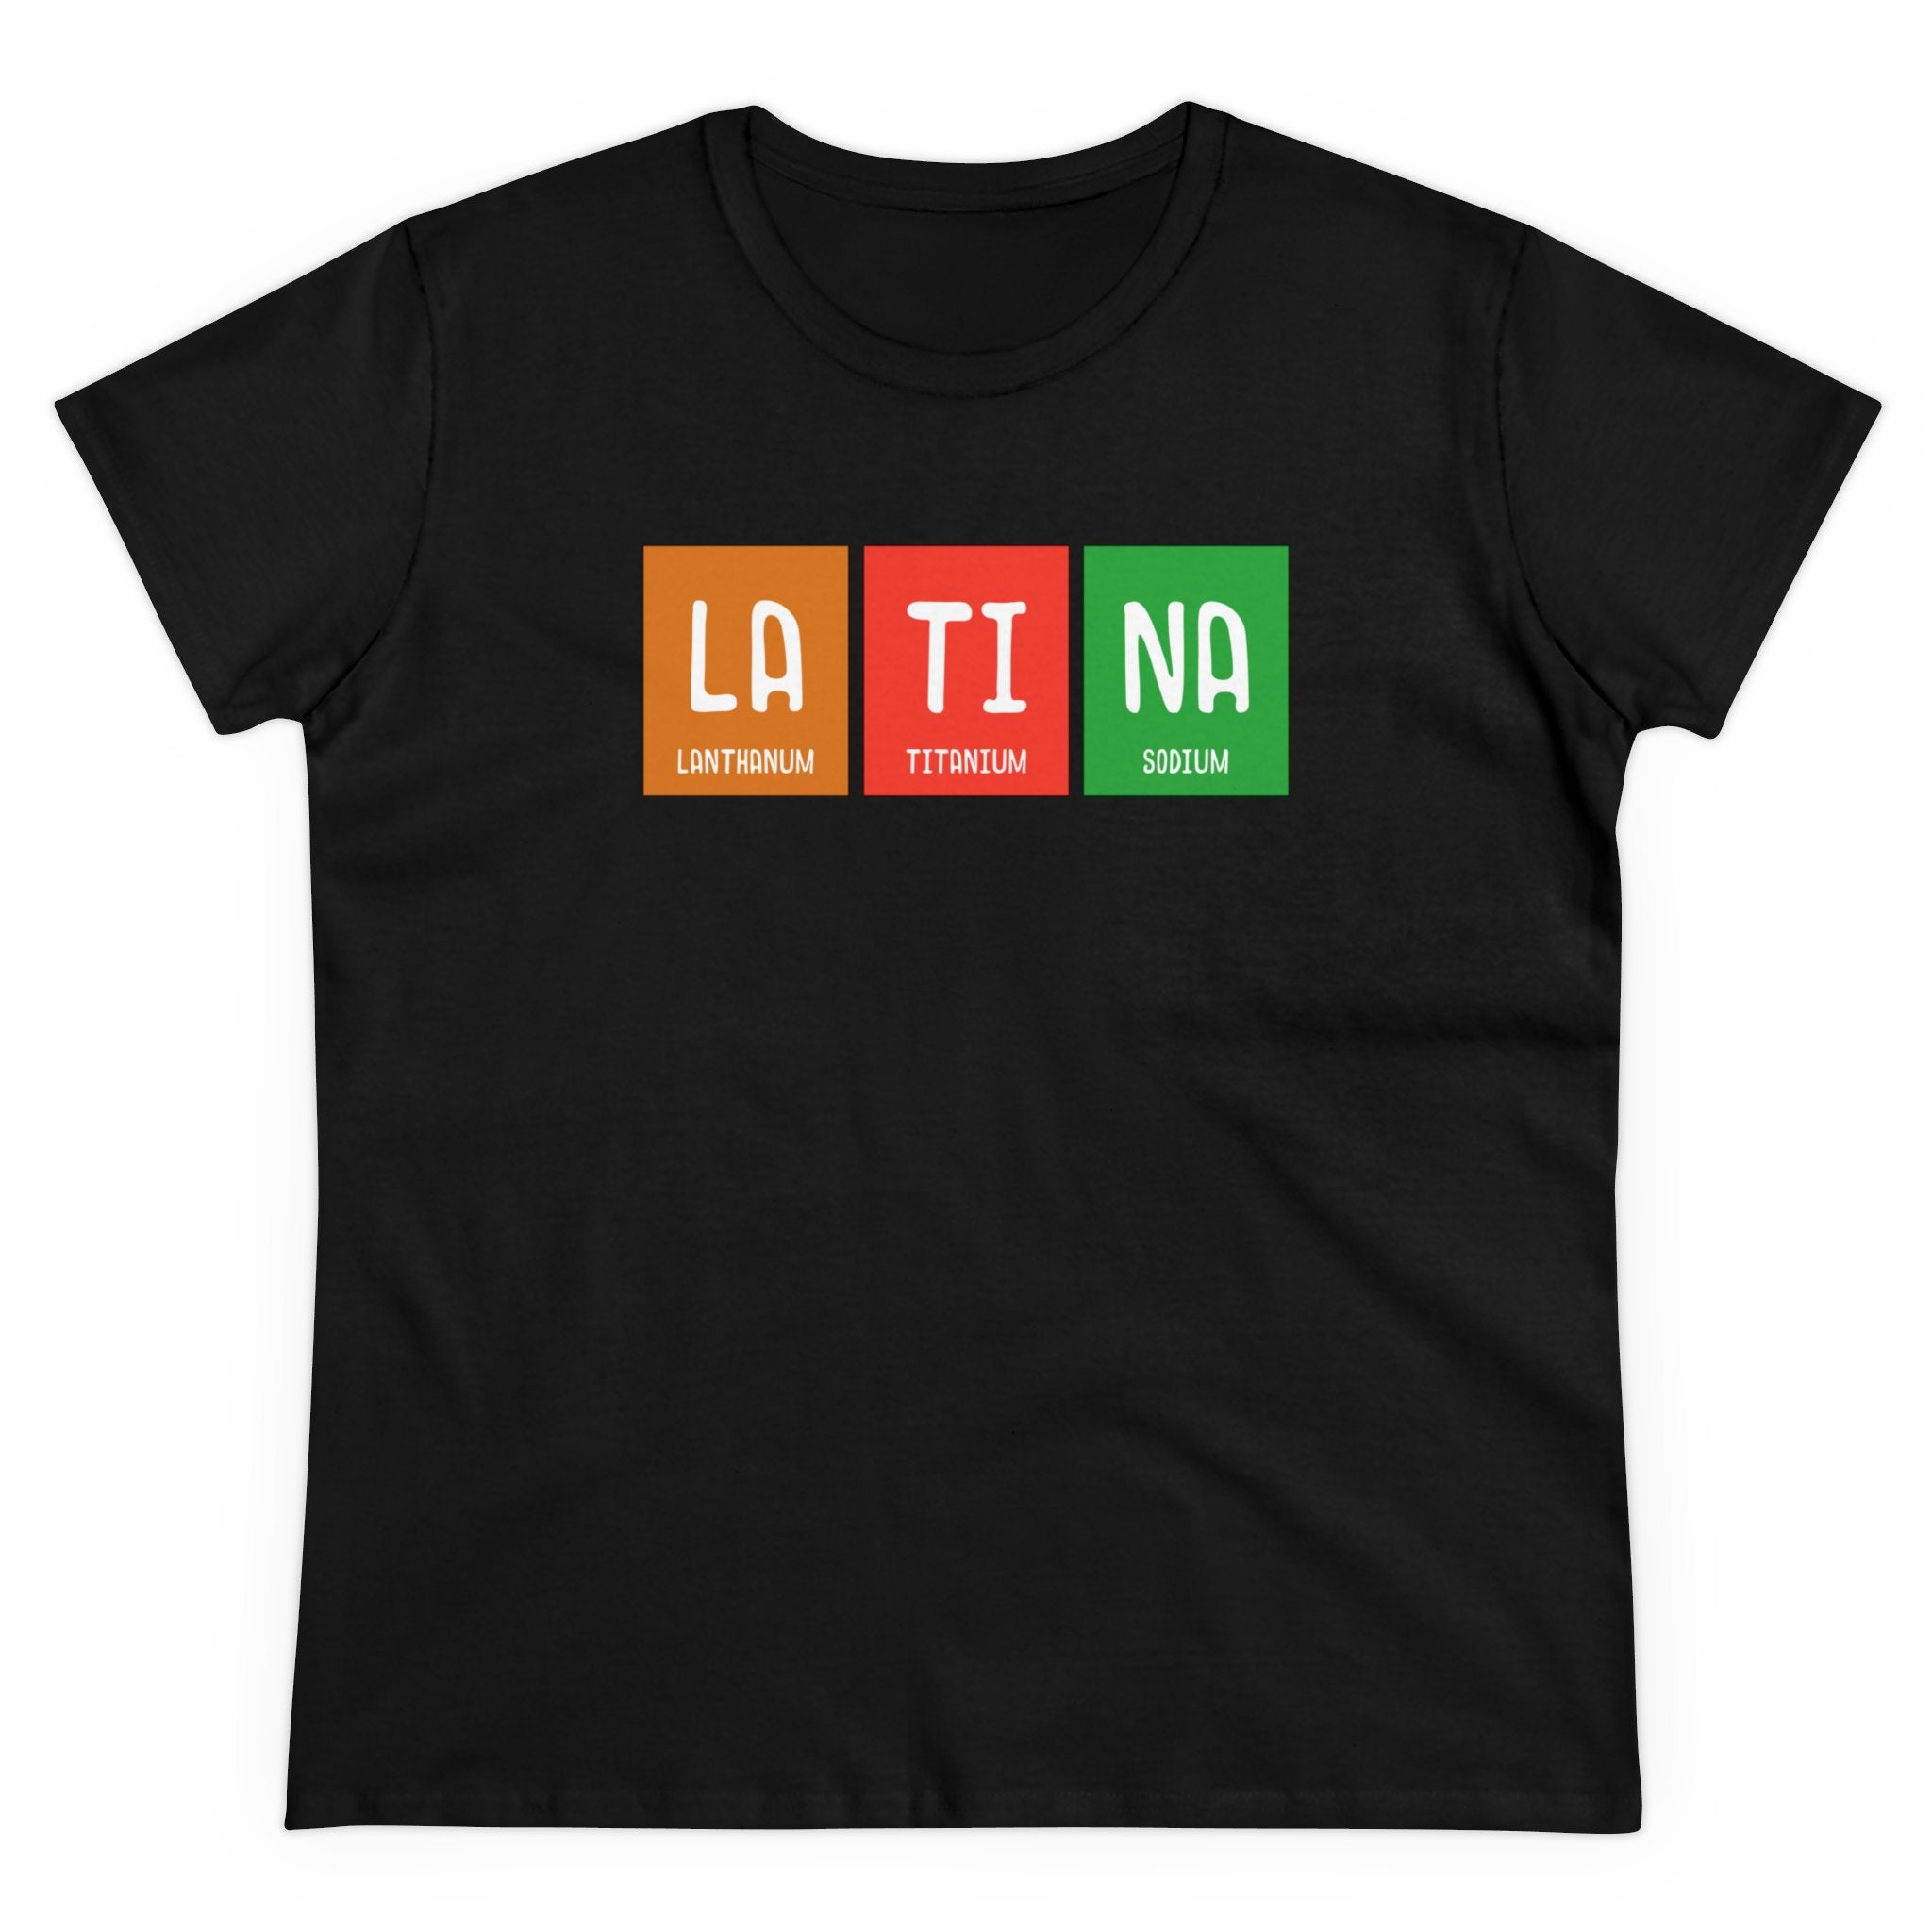 Sure, here is the revised sentence:
"Black T-shirt featuring the word 'LATINA' written using periodic table elements symbols for Lanthanum (La), Titanium (Ti), and Sodium (Na). This **LA-TI-NA - Women's Tee** is crafted from US-grown cotton, offering comfort and style with its clever LA-TI-NA design.